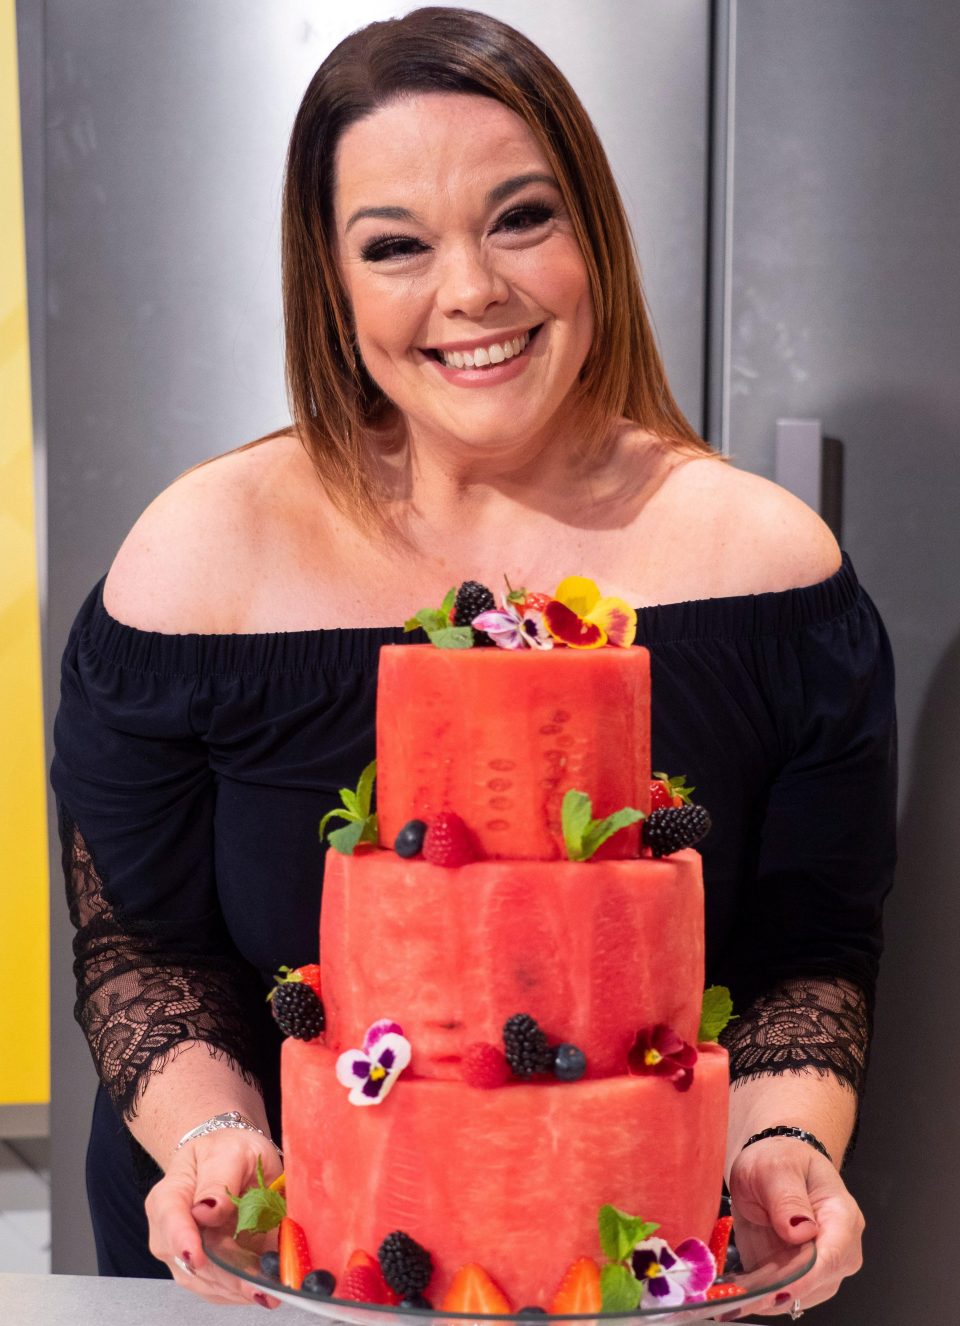 Lisa Riley celebrates her Birthday with Watermelon Cake made by Fruity Gift at popular Today's-Lorraine on ITV.